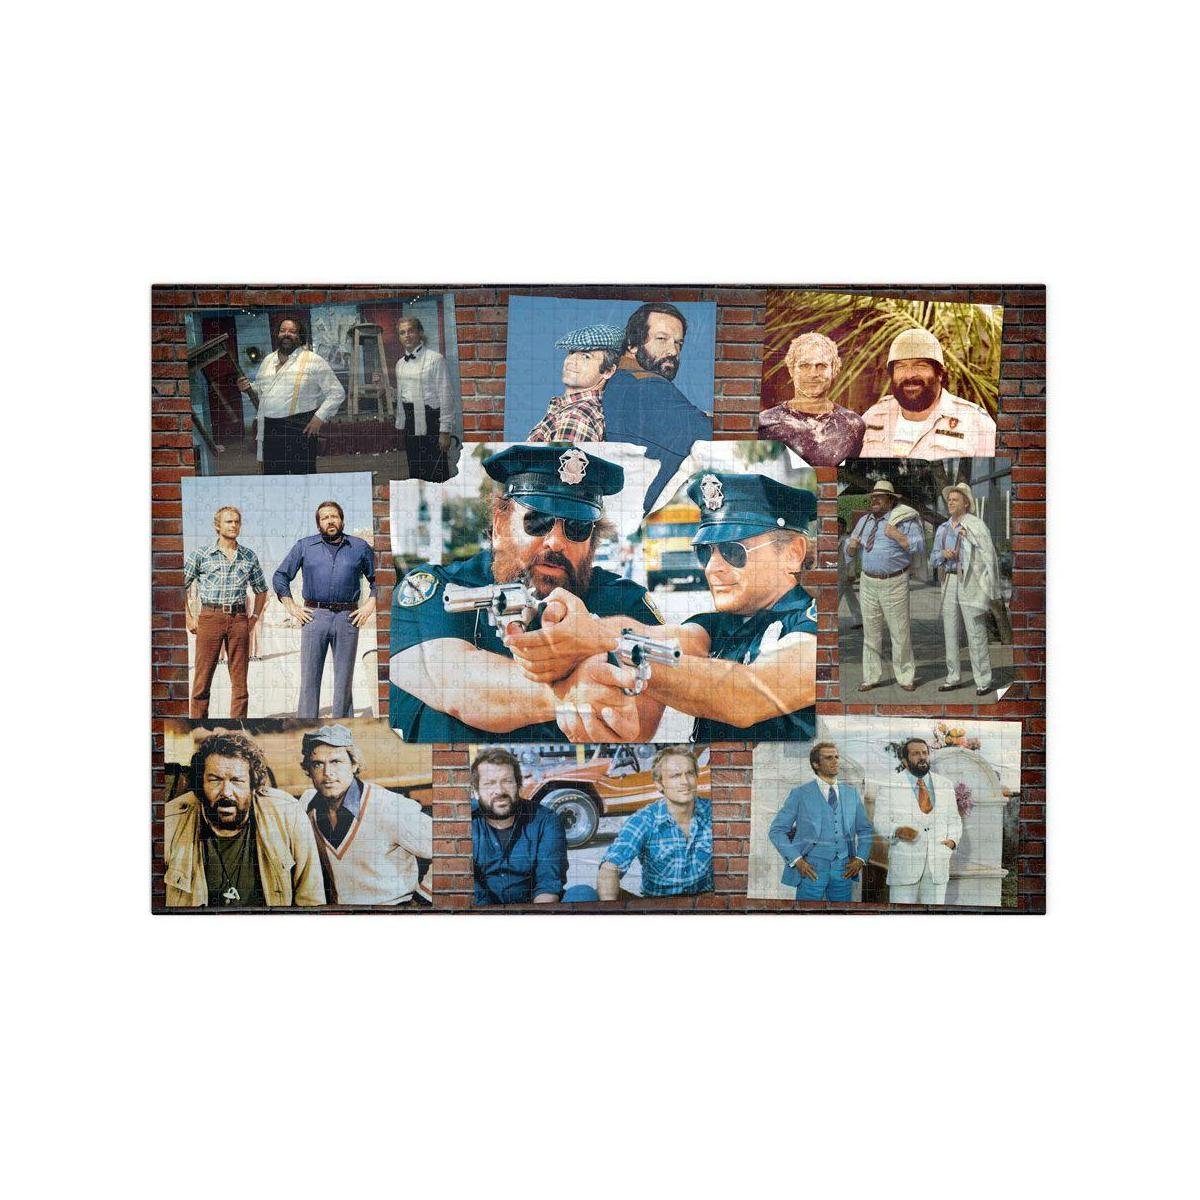 Oakie Doakie Puzzle Bud Spencer & Terence Hill Puzzle Poster Wall #002, 1000 Teile, 1000 Puzzleteile